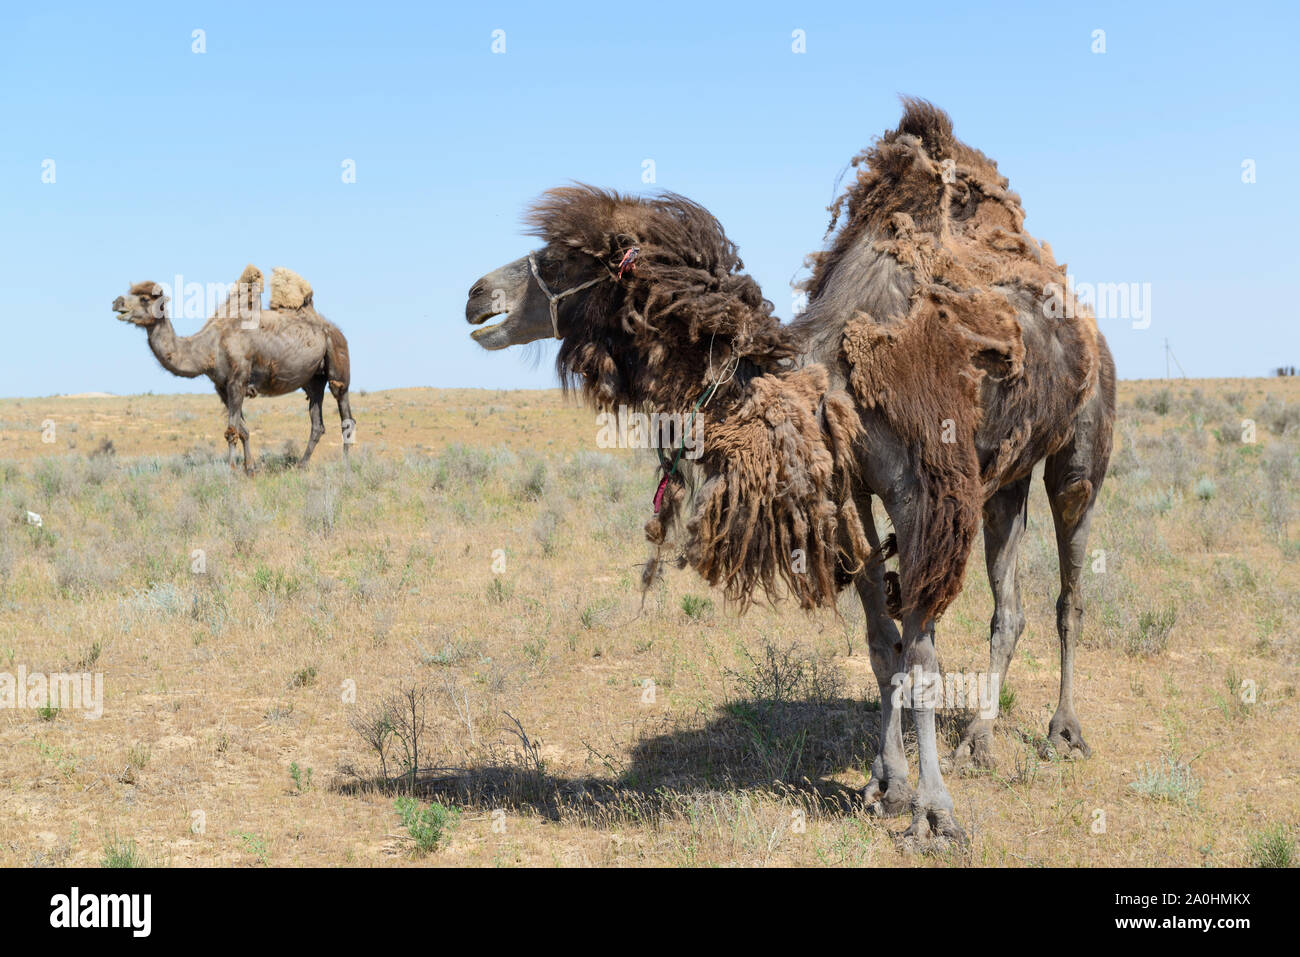 Bactrian camel in Kazakhstan, most of them losing their thick fur after ...